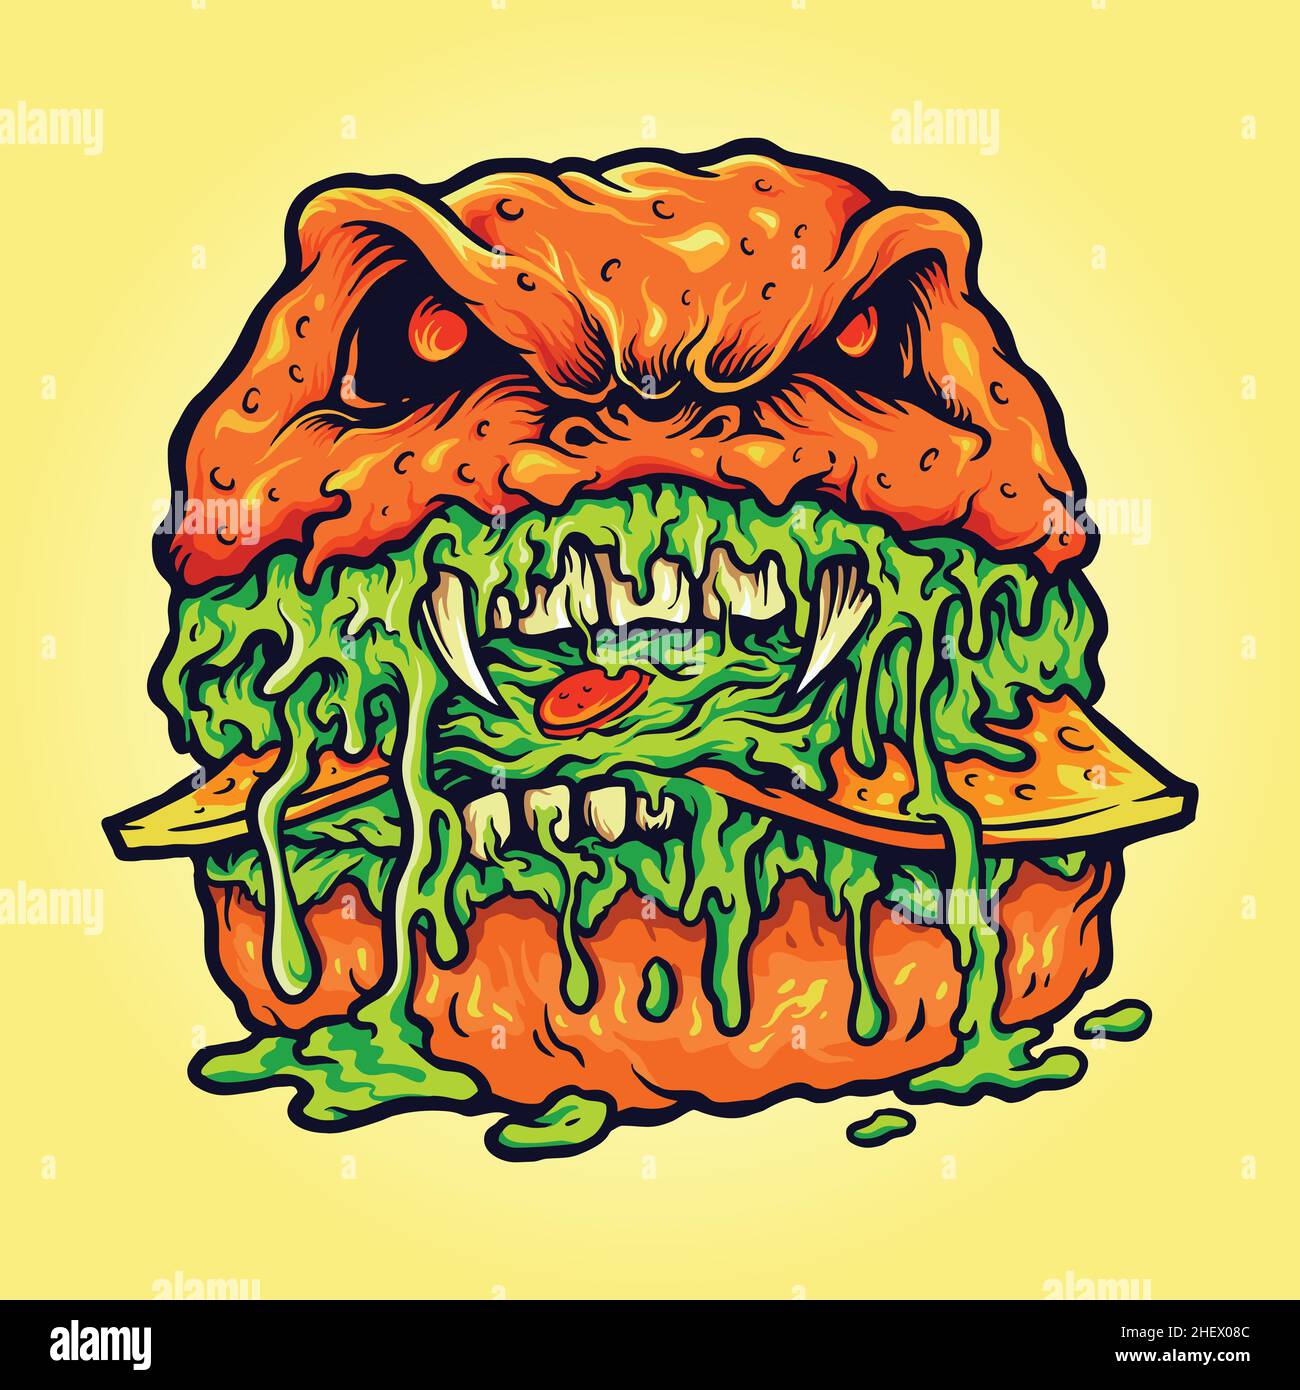 Zombie Burger Melt Vector illustrations for your work Logo, mascot merchandise t-shirt, stickers and Label designs, poster, greeting cards advertising Stock Vector